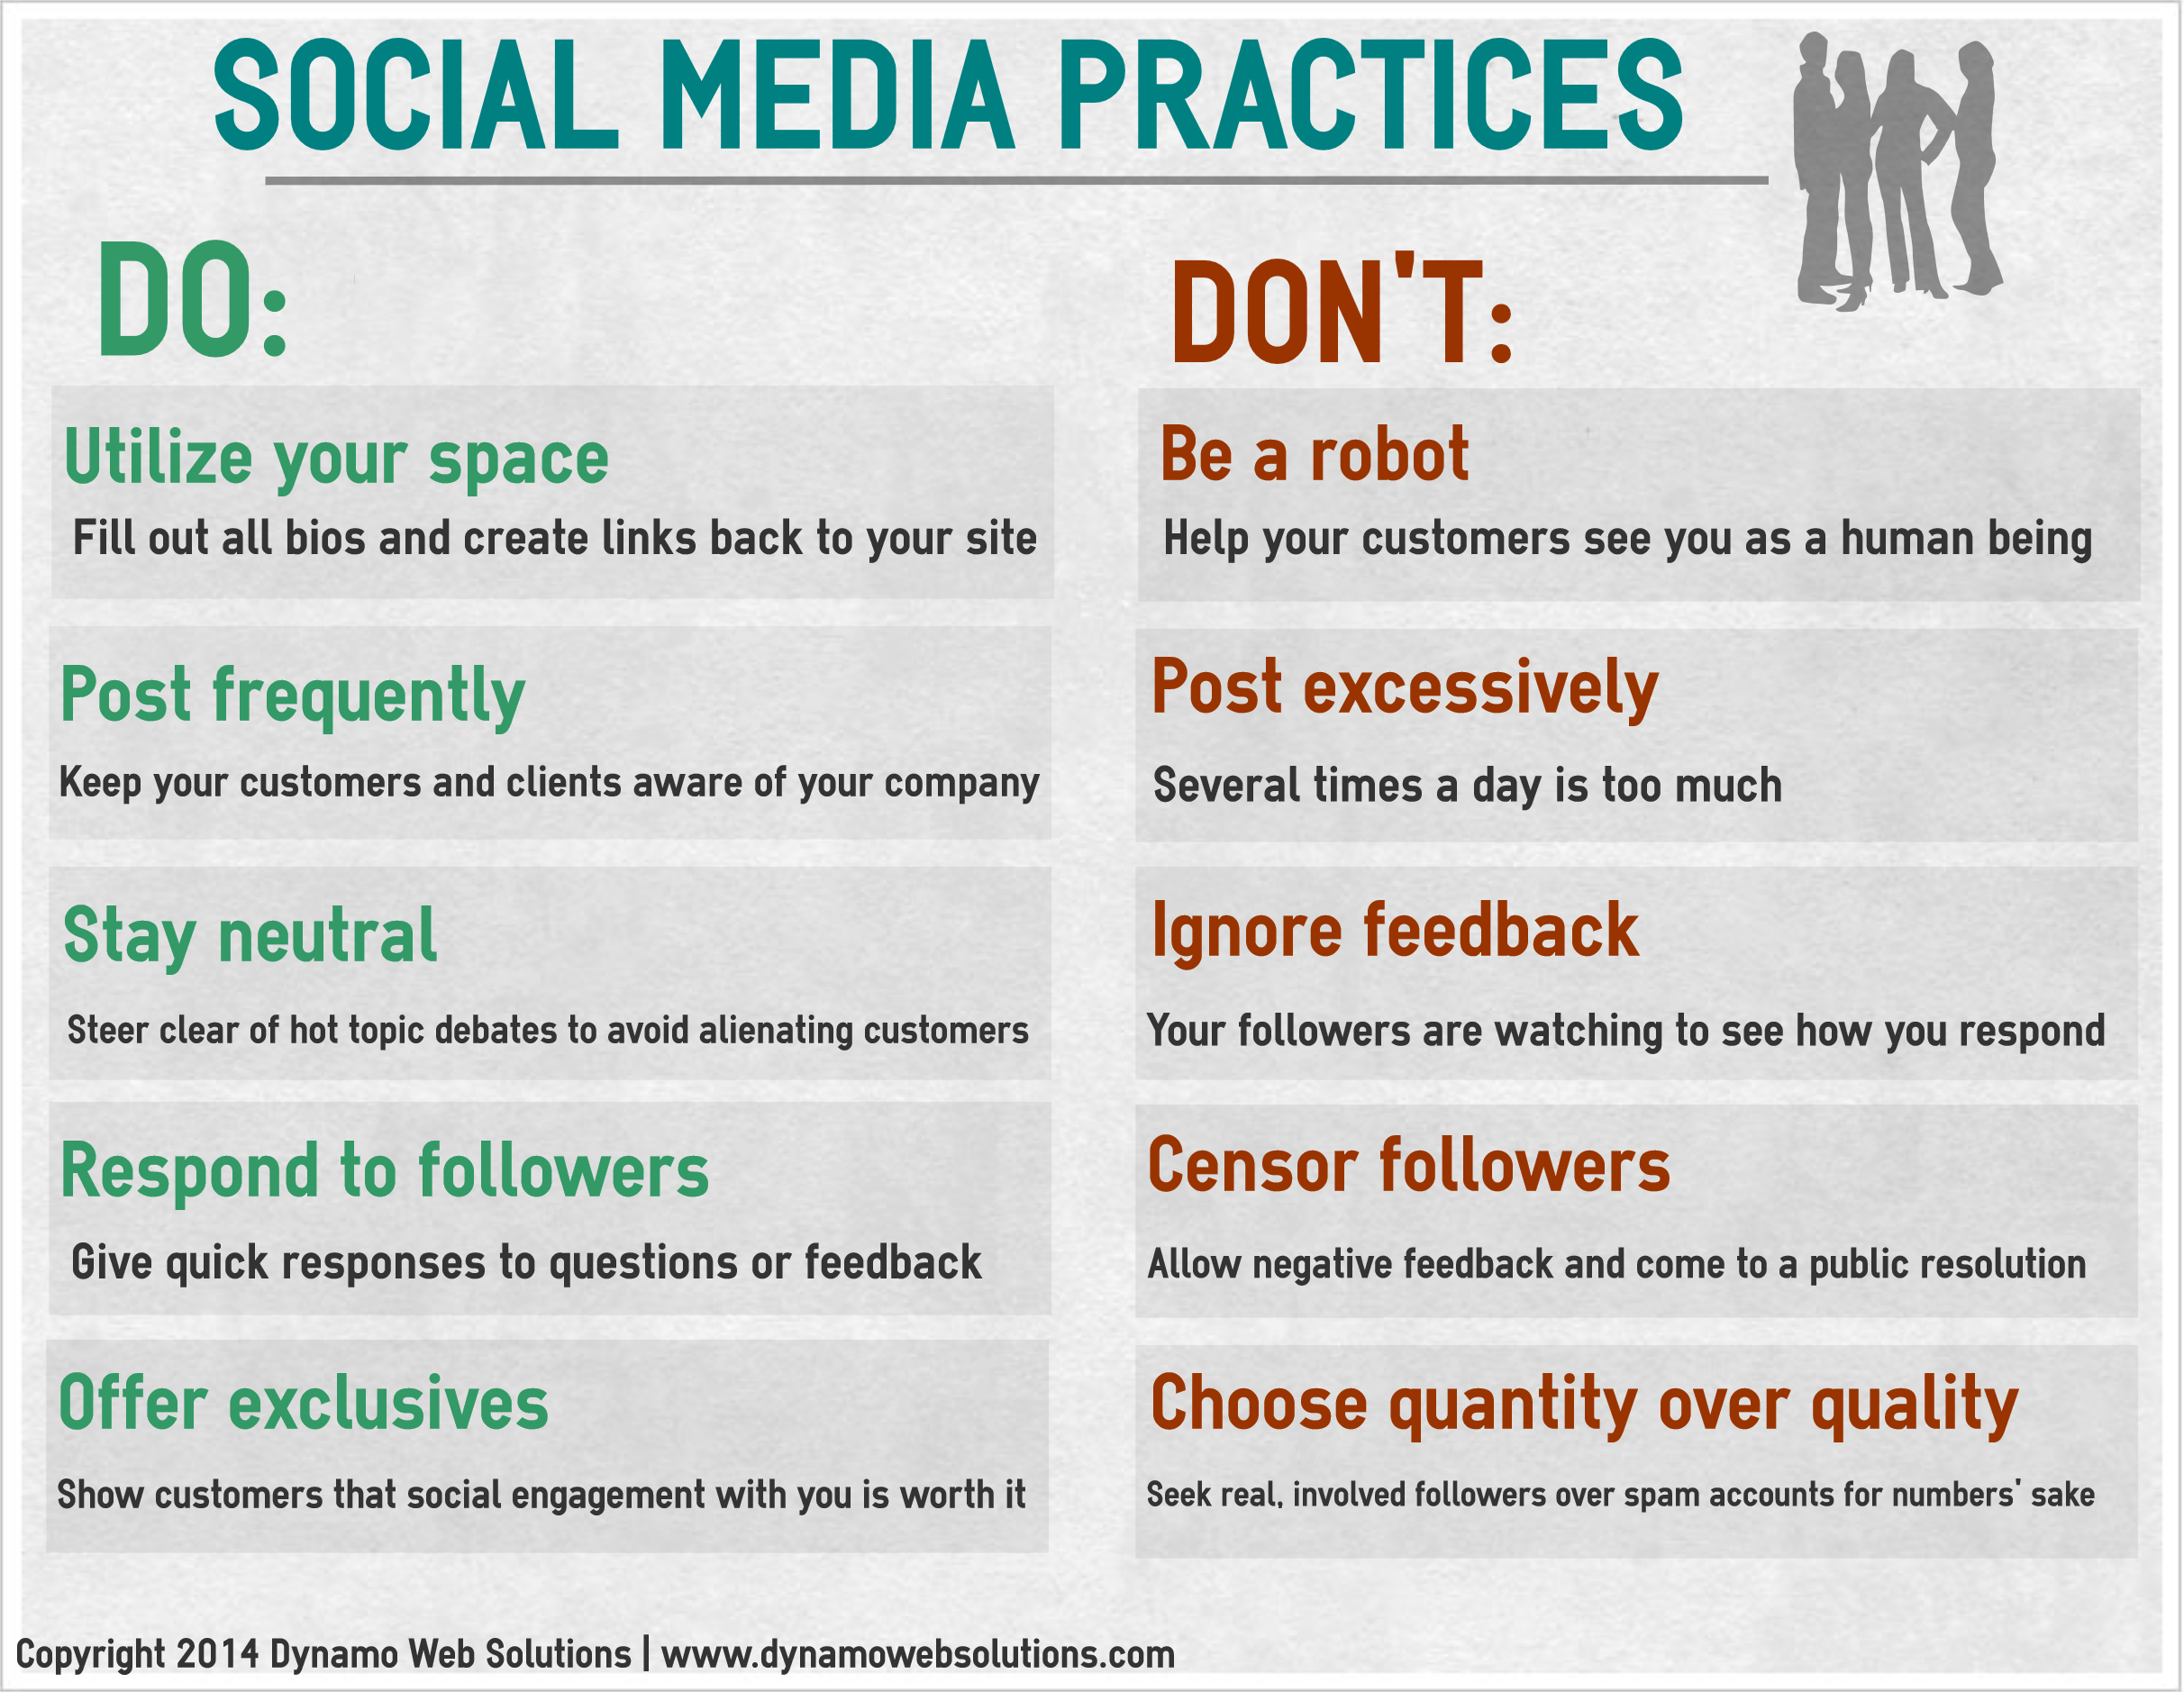 Social Media Practices by Dynamo Web Solutions IG - Social Media Practices